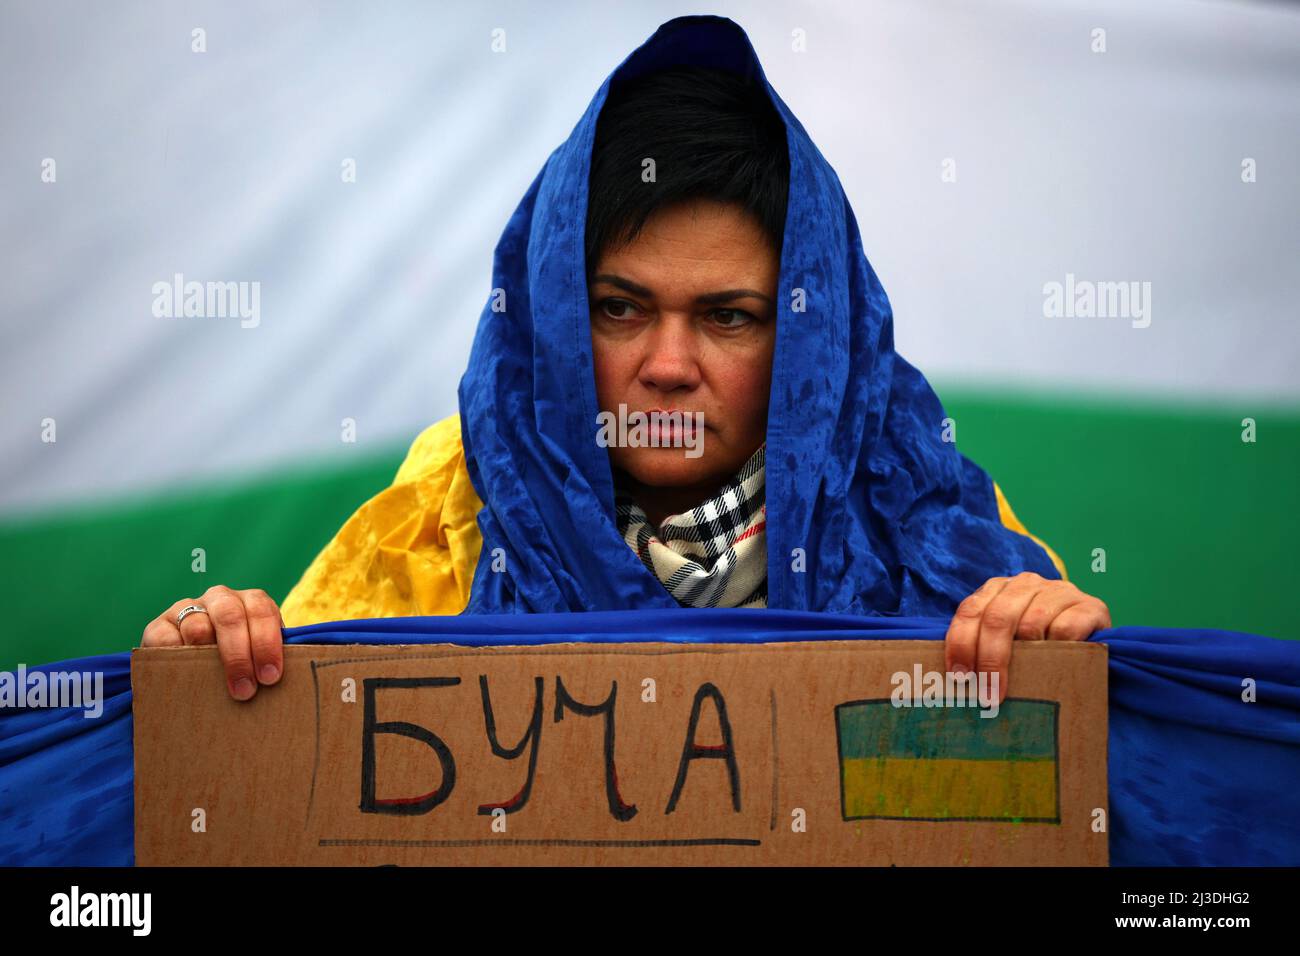 Sofia, Bulgaria - 7 April, 2022: Woman holds a sign with the name of Ukrainian city 'Bucha' during a demonstration in support of Ukraine. On 24th of February Russian army entered Ukrainian territory in what the Russian president Vladimir Putin declared a 'special military operation'. Stock Photo